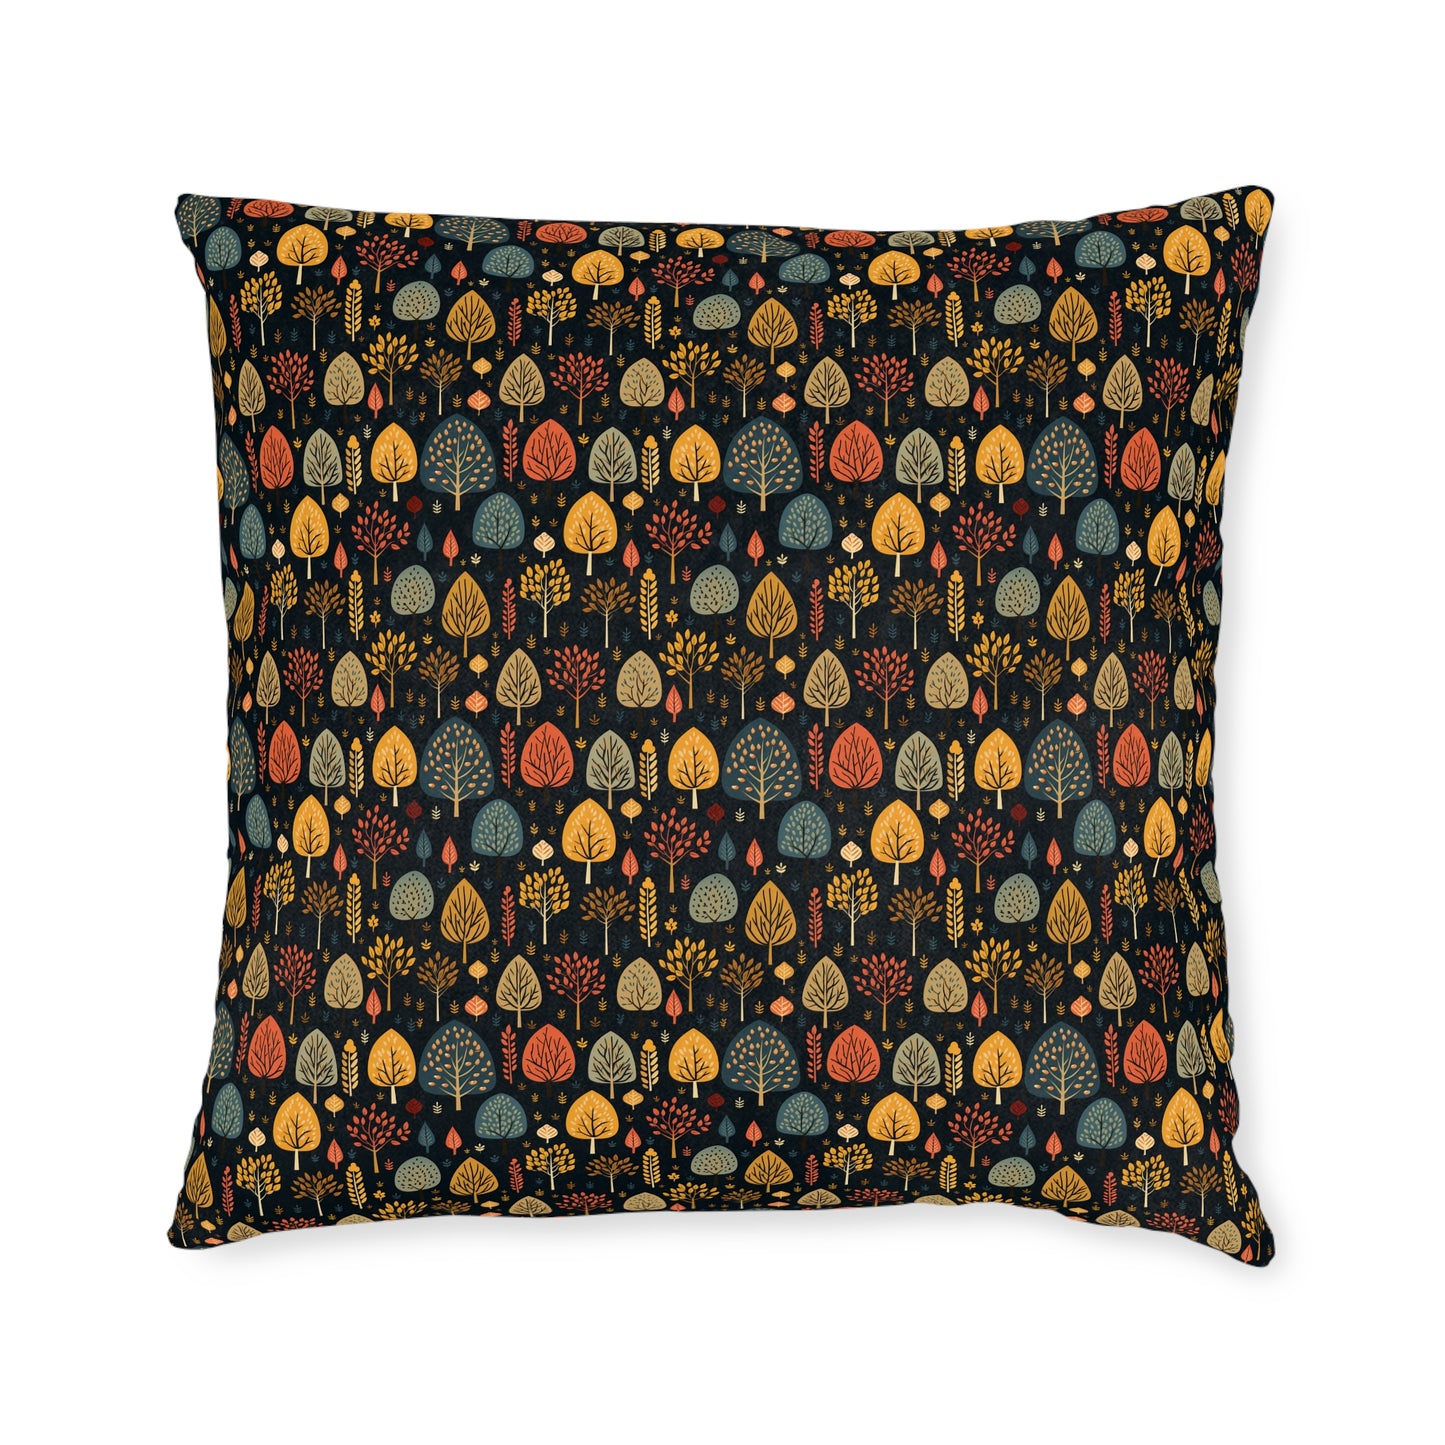 Mid-Century Mosaic: Dappled Leaves and Folk Imagery - Square Pillow